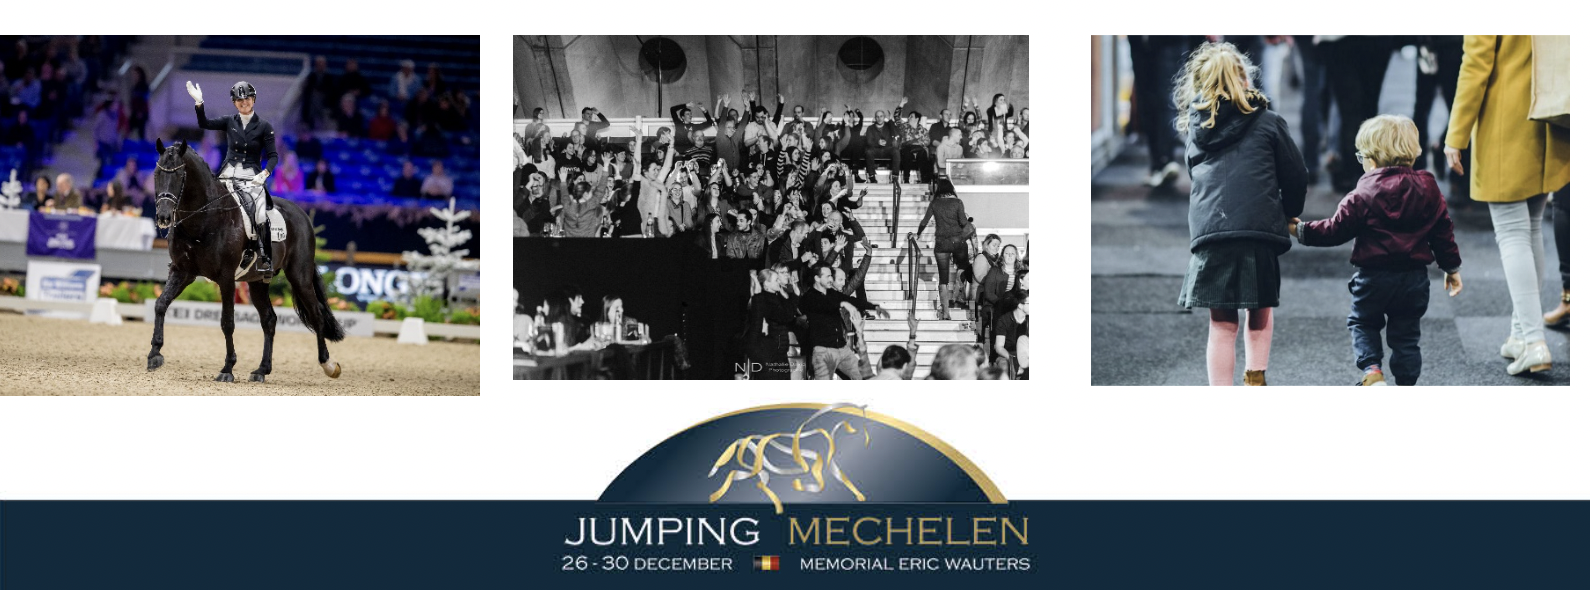 Jumping Mechelen goes national and moves to Azelhof in Lier